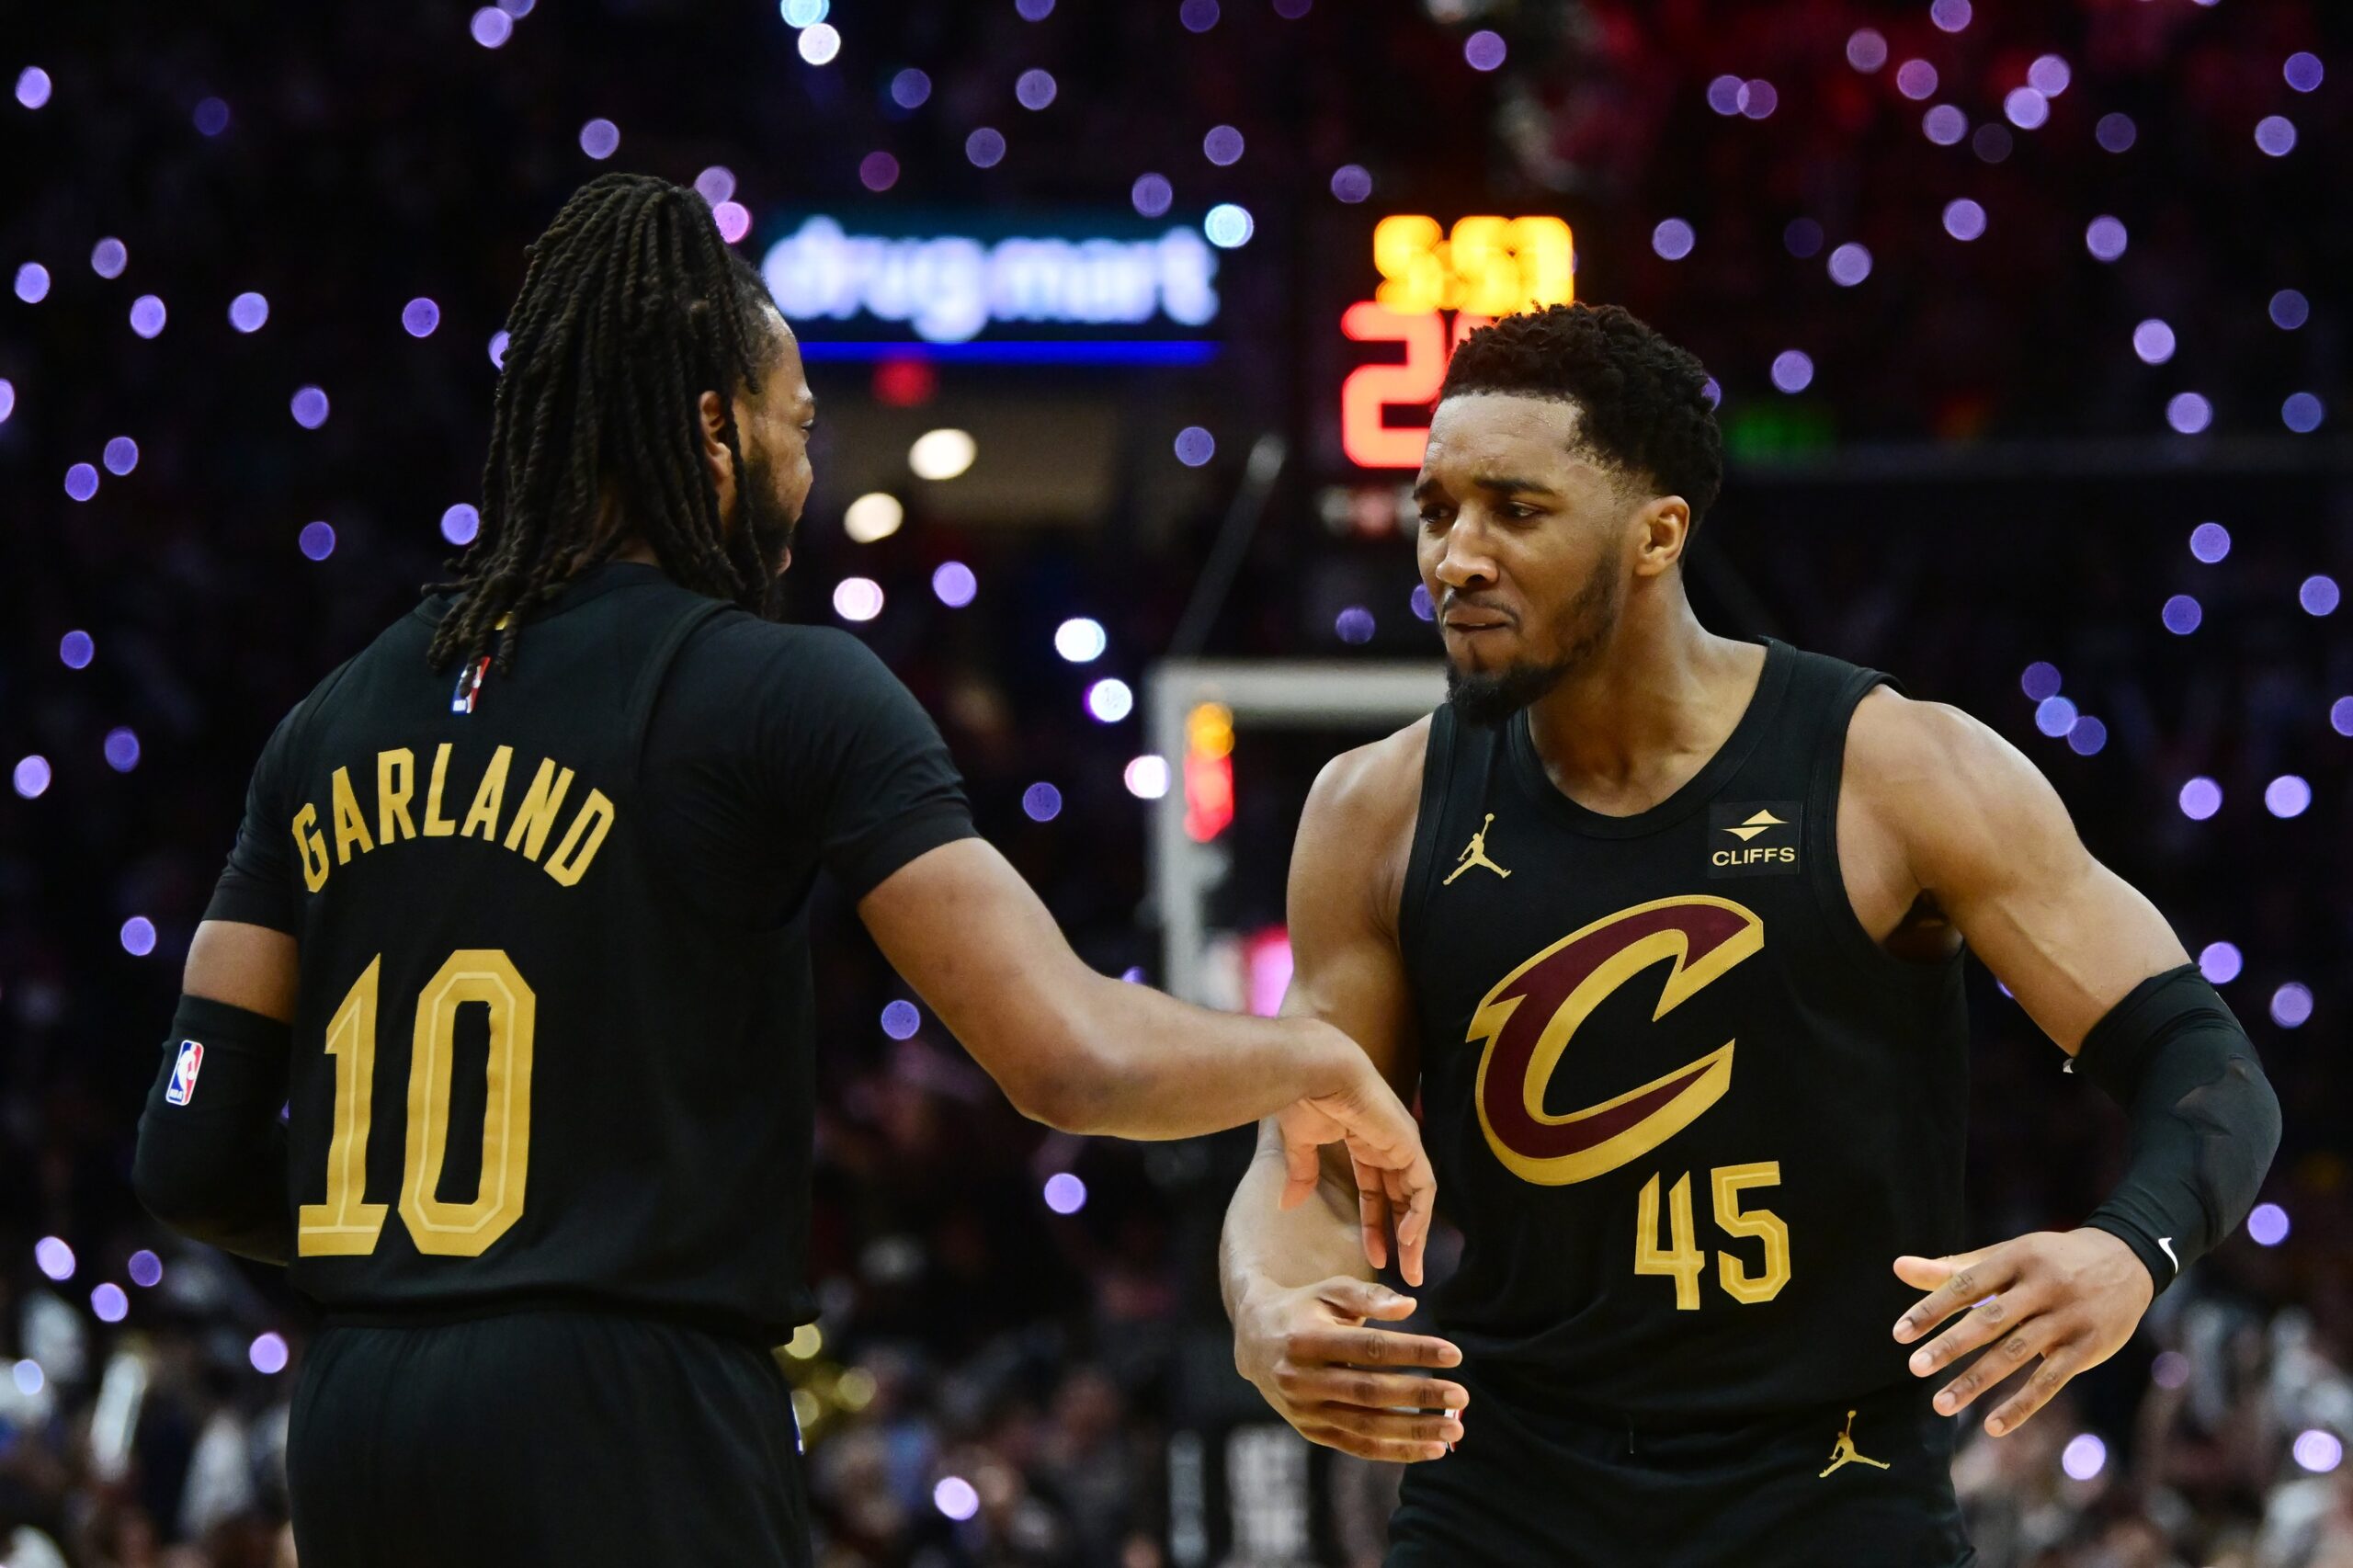 Cleveland Cavaliers star guards Donovan Mitchell and Darius Garland